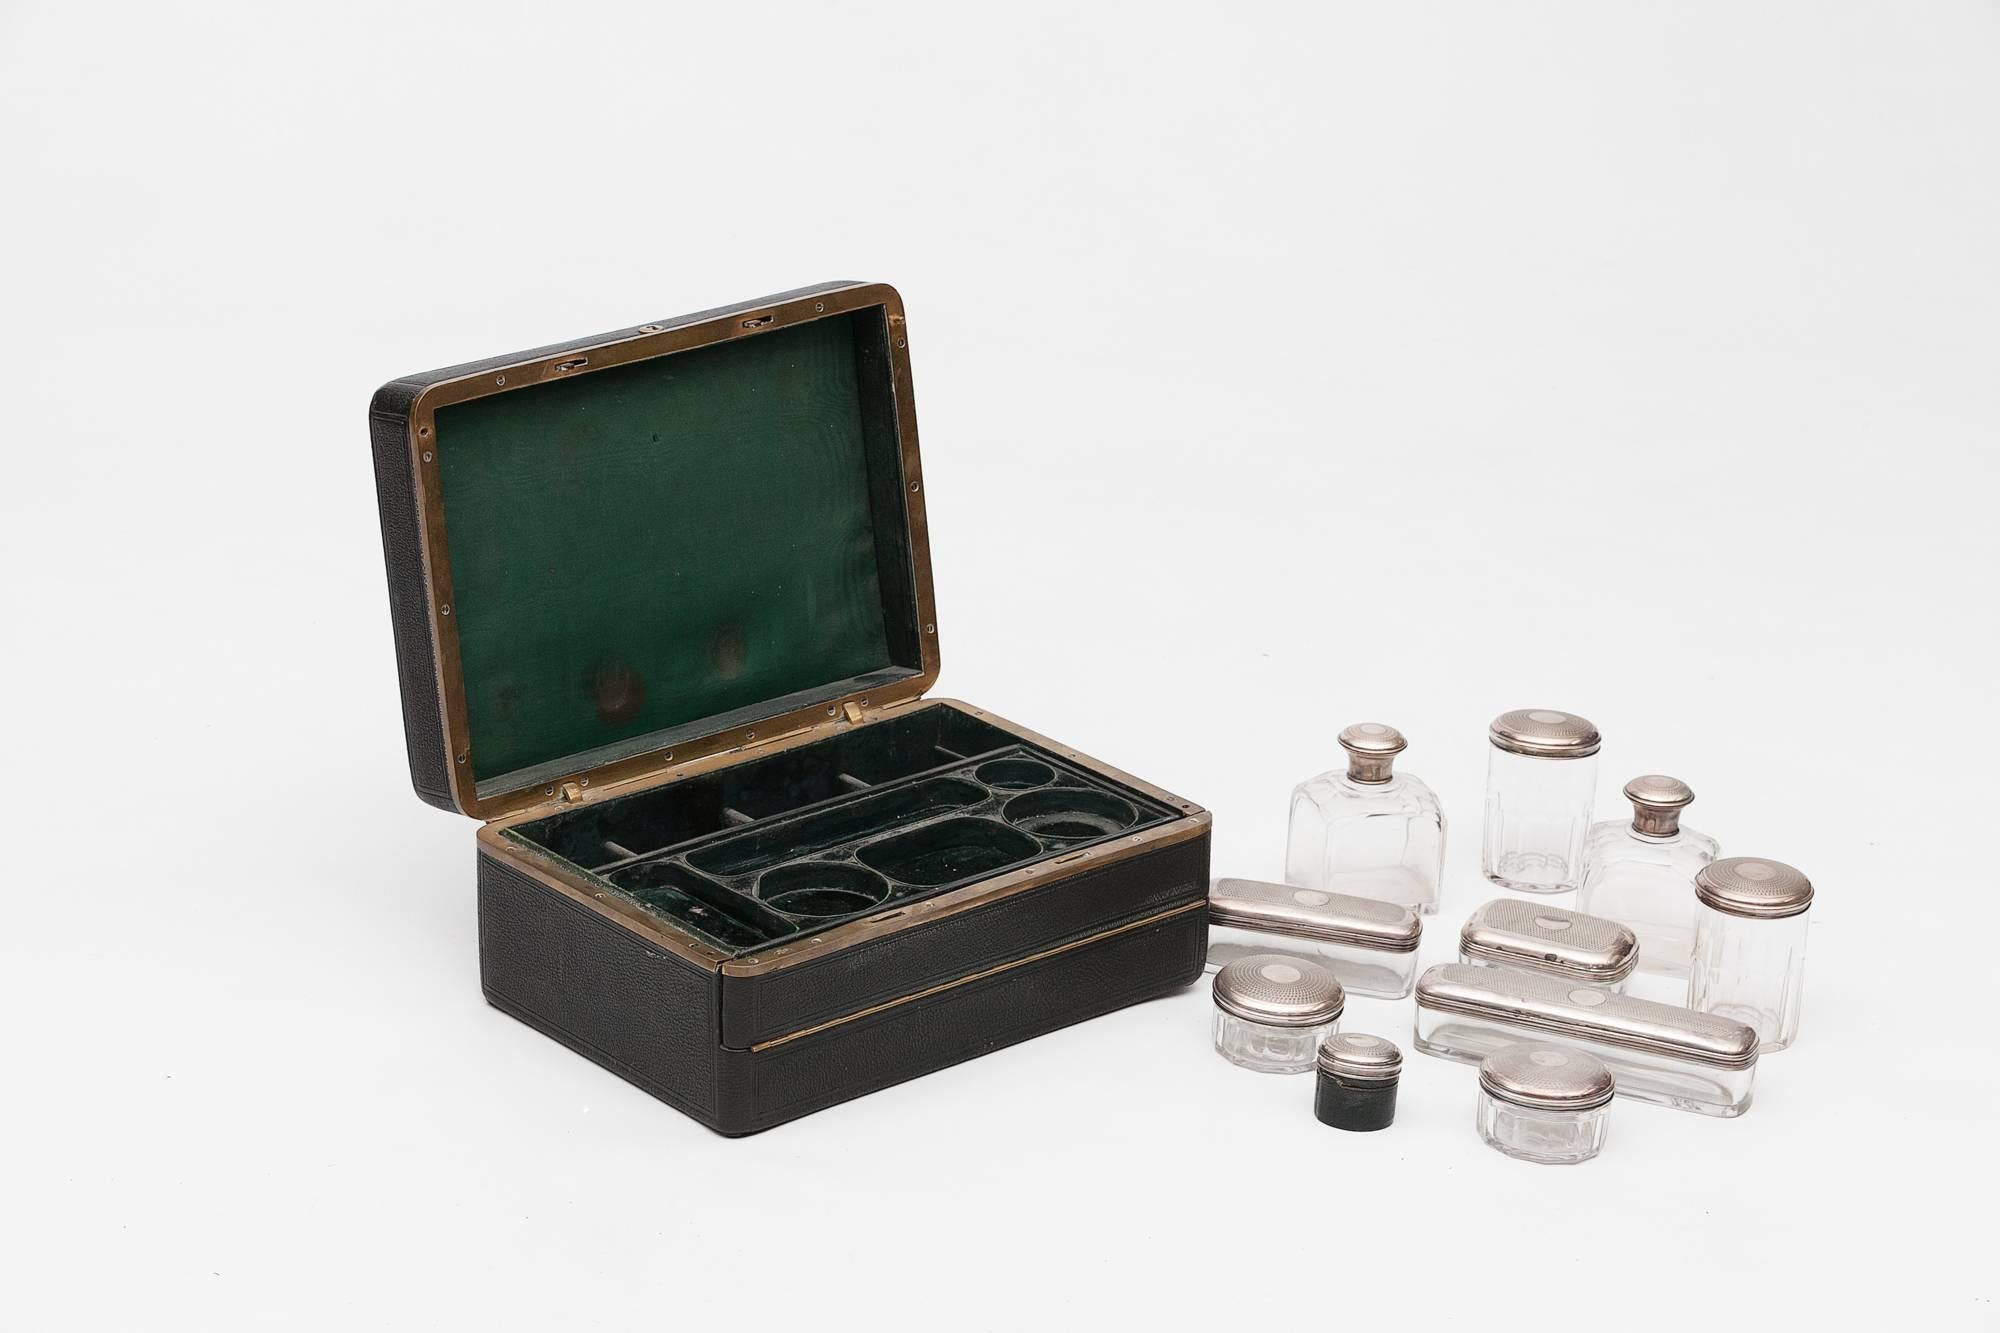 19th century pigskin and silver plated gentleman’s dressing case, fitted silver topped glass toiletries container and lined with green silk. Fall front allowing upper section to slide forward revealing jewelry / dress stud case below. ‘French made’.